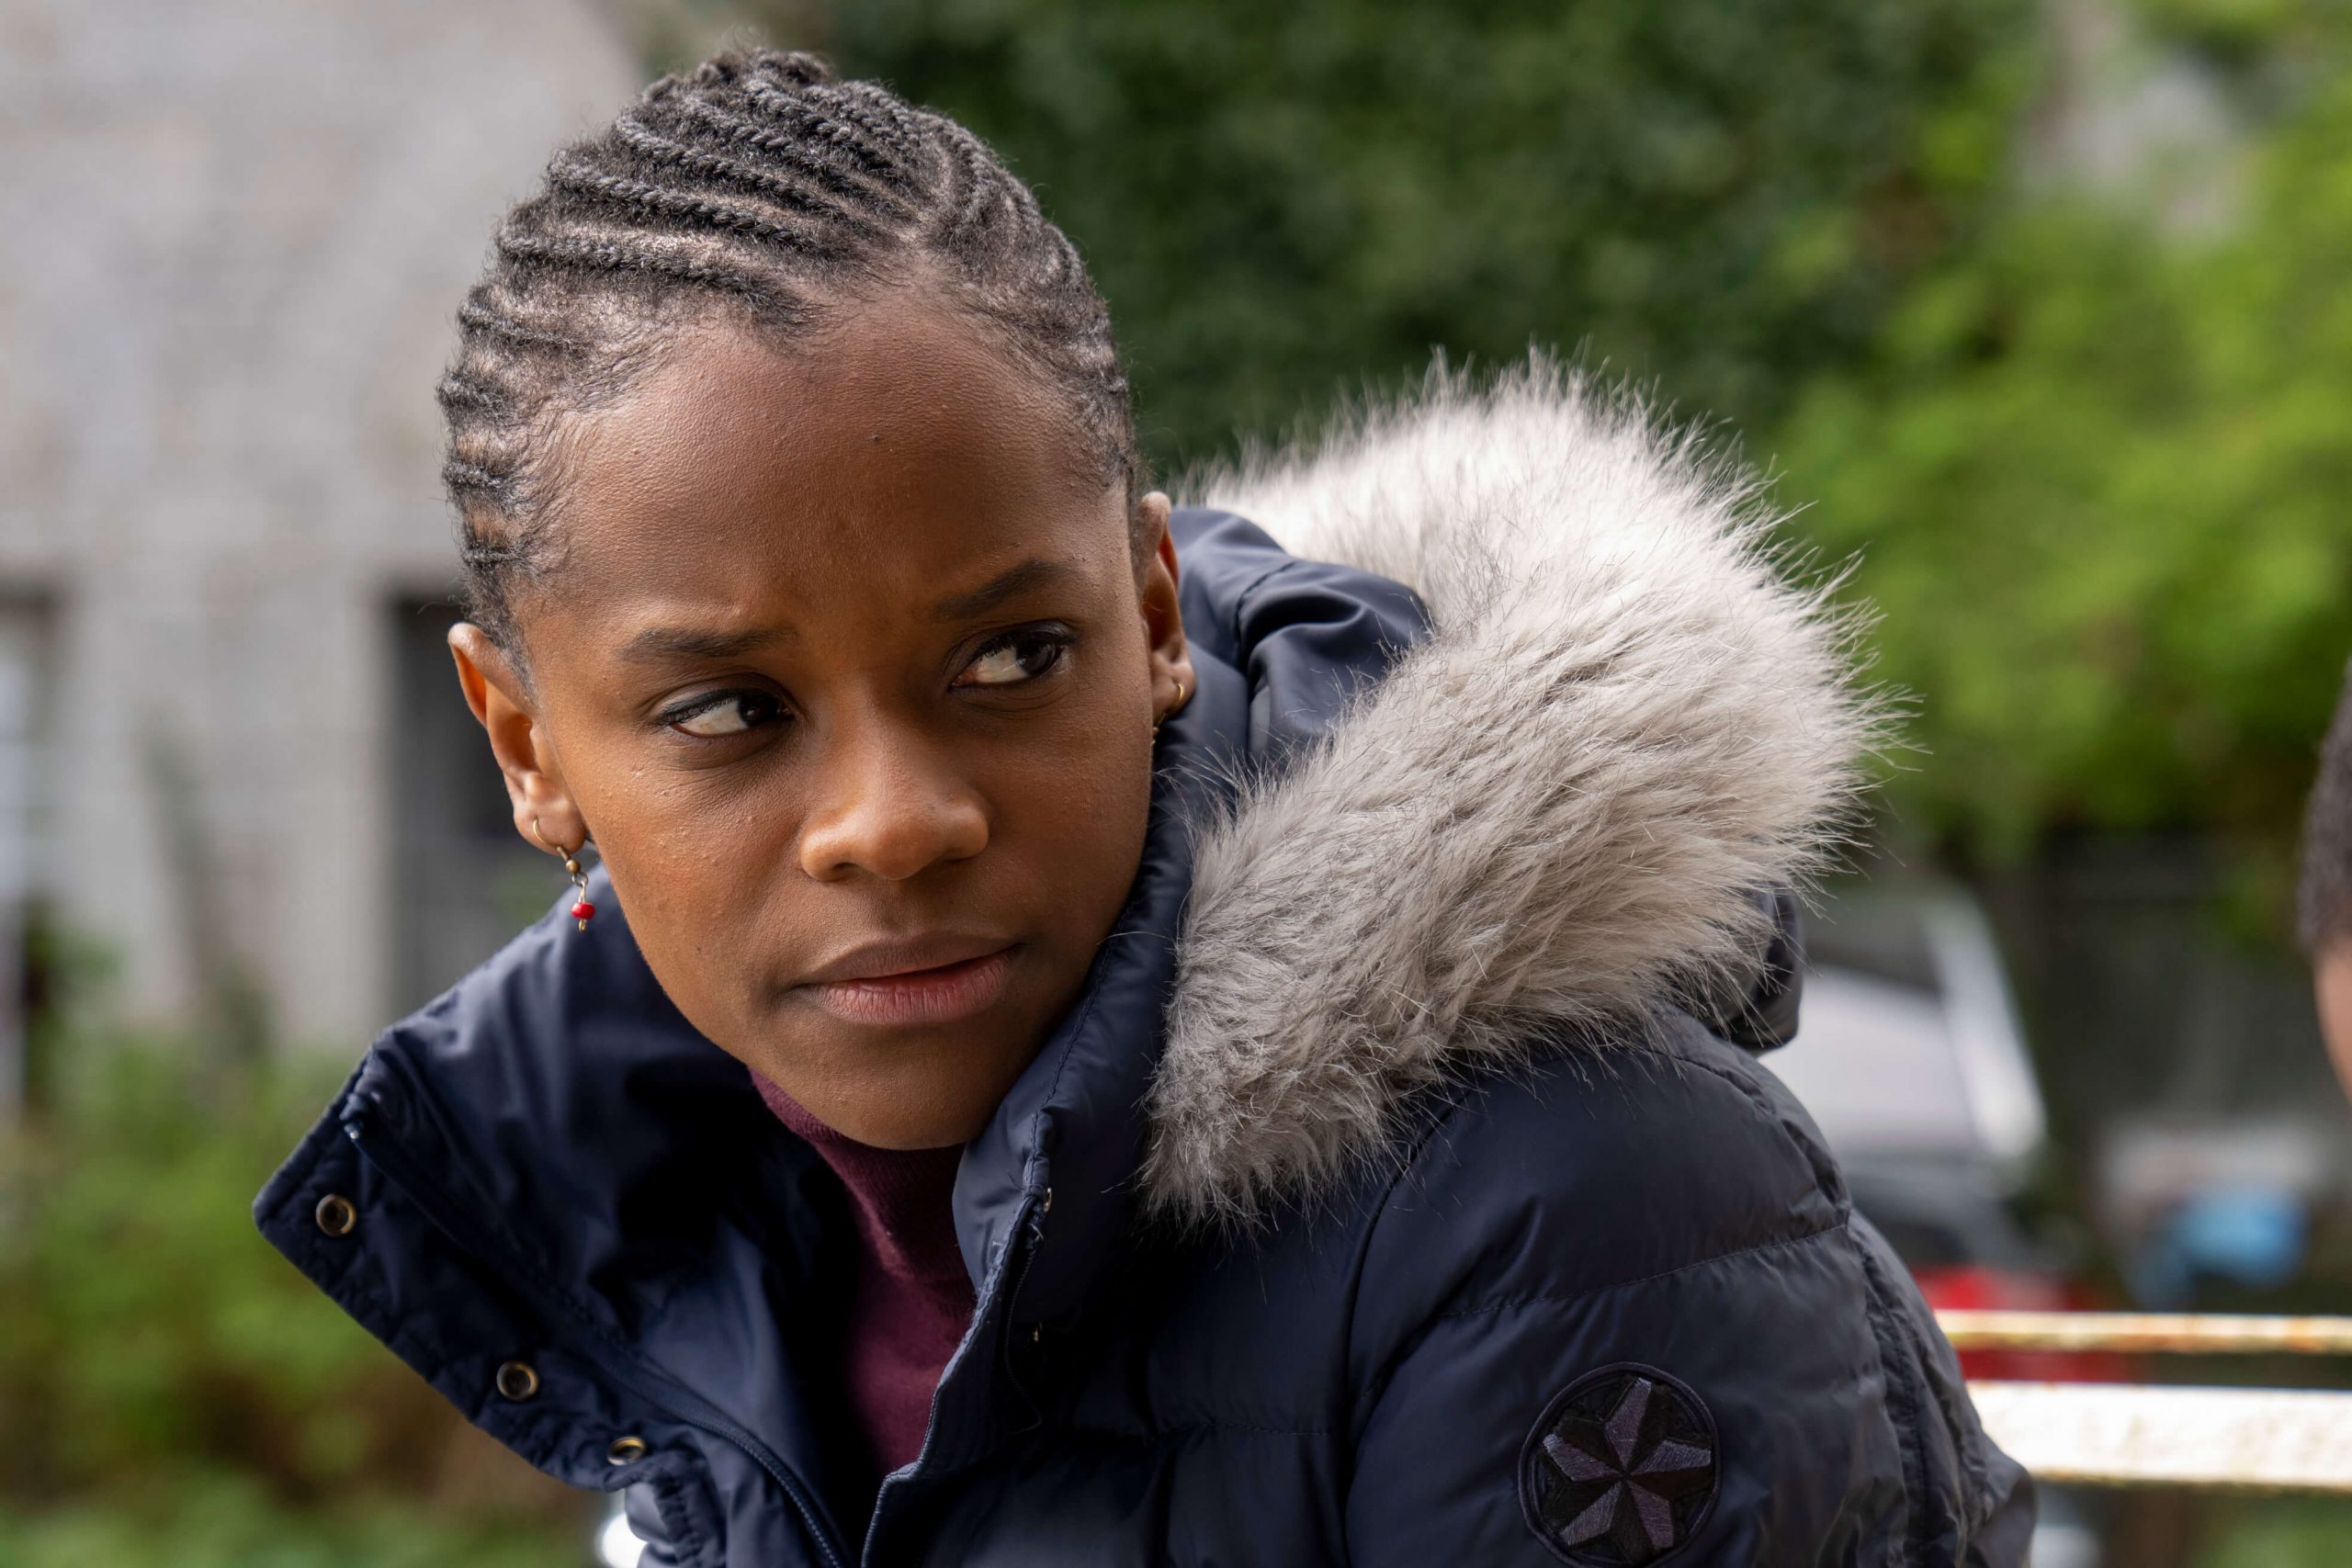 View Post, Aisha film review: Letitia Wright’s asylum seeker is “dignified and tenacious”, View Post, Aisha film review: Letitia Wright’s asylum seeker is “dignified and tenacious”